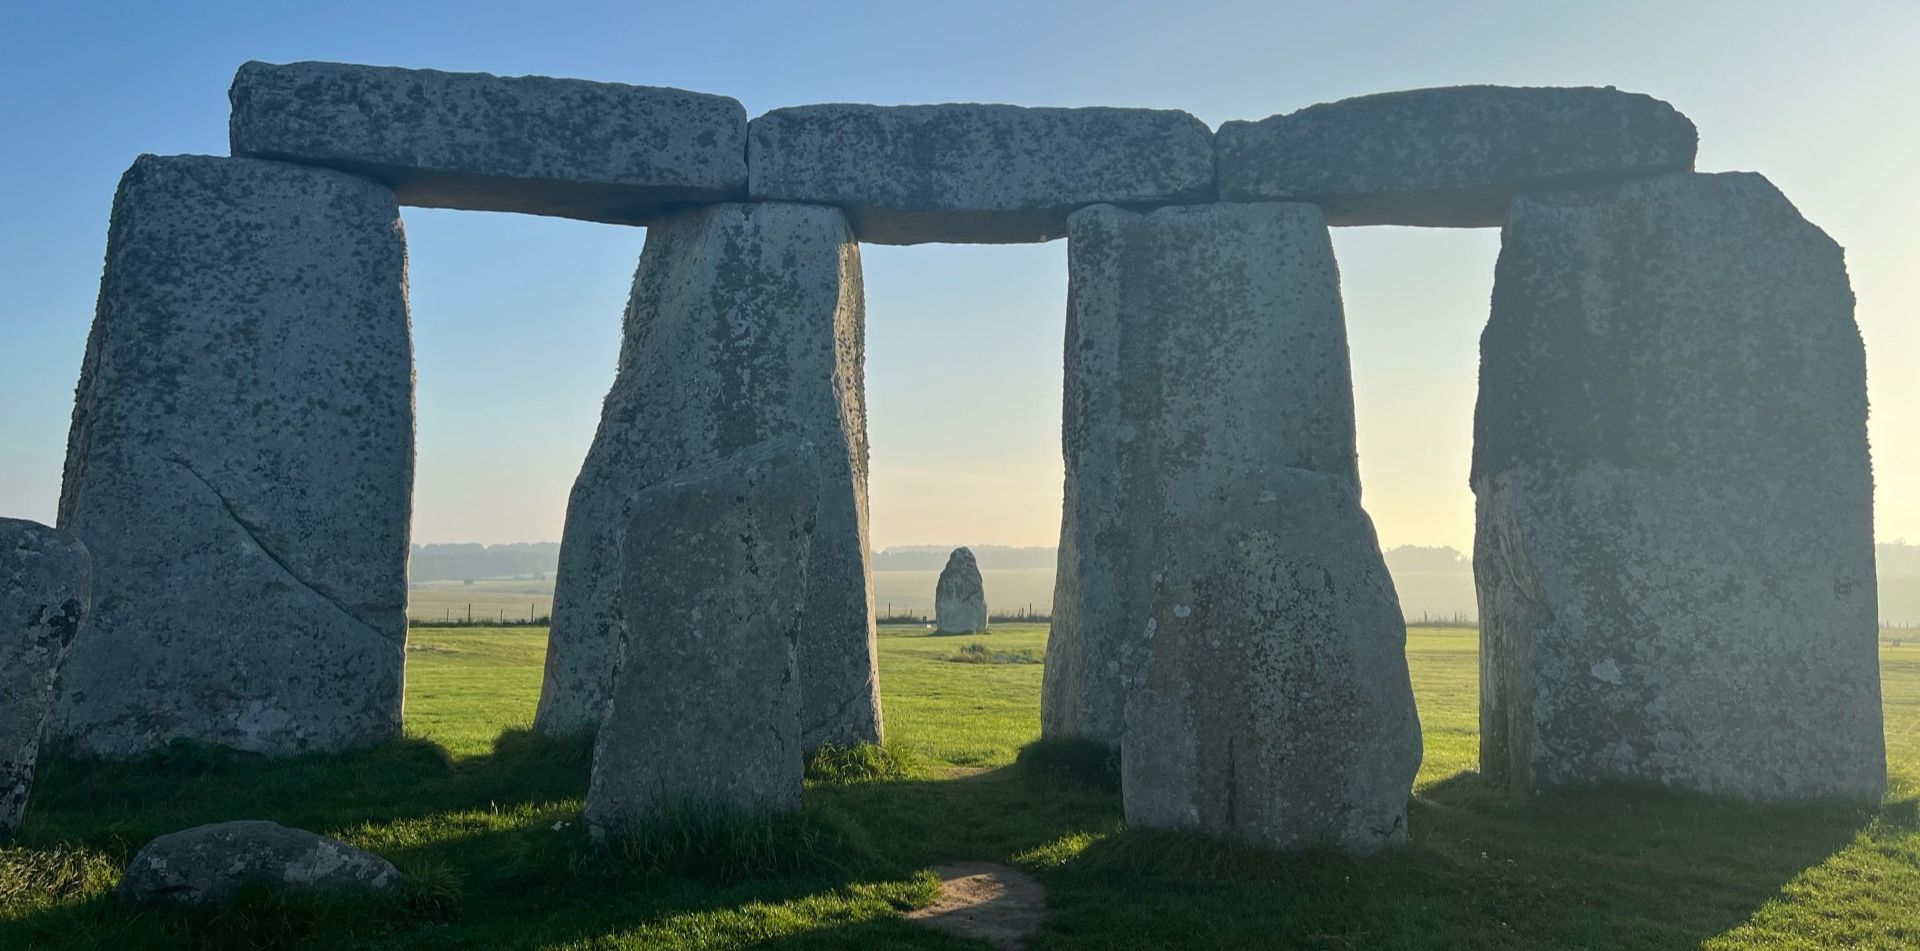 Marvel at the iconic Stonehenge site without the crowds